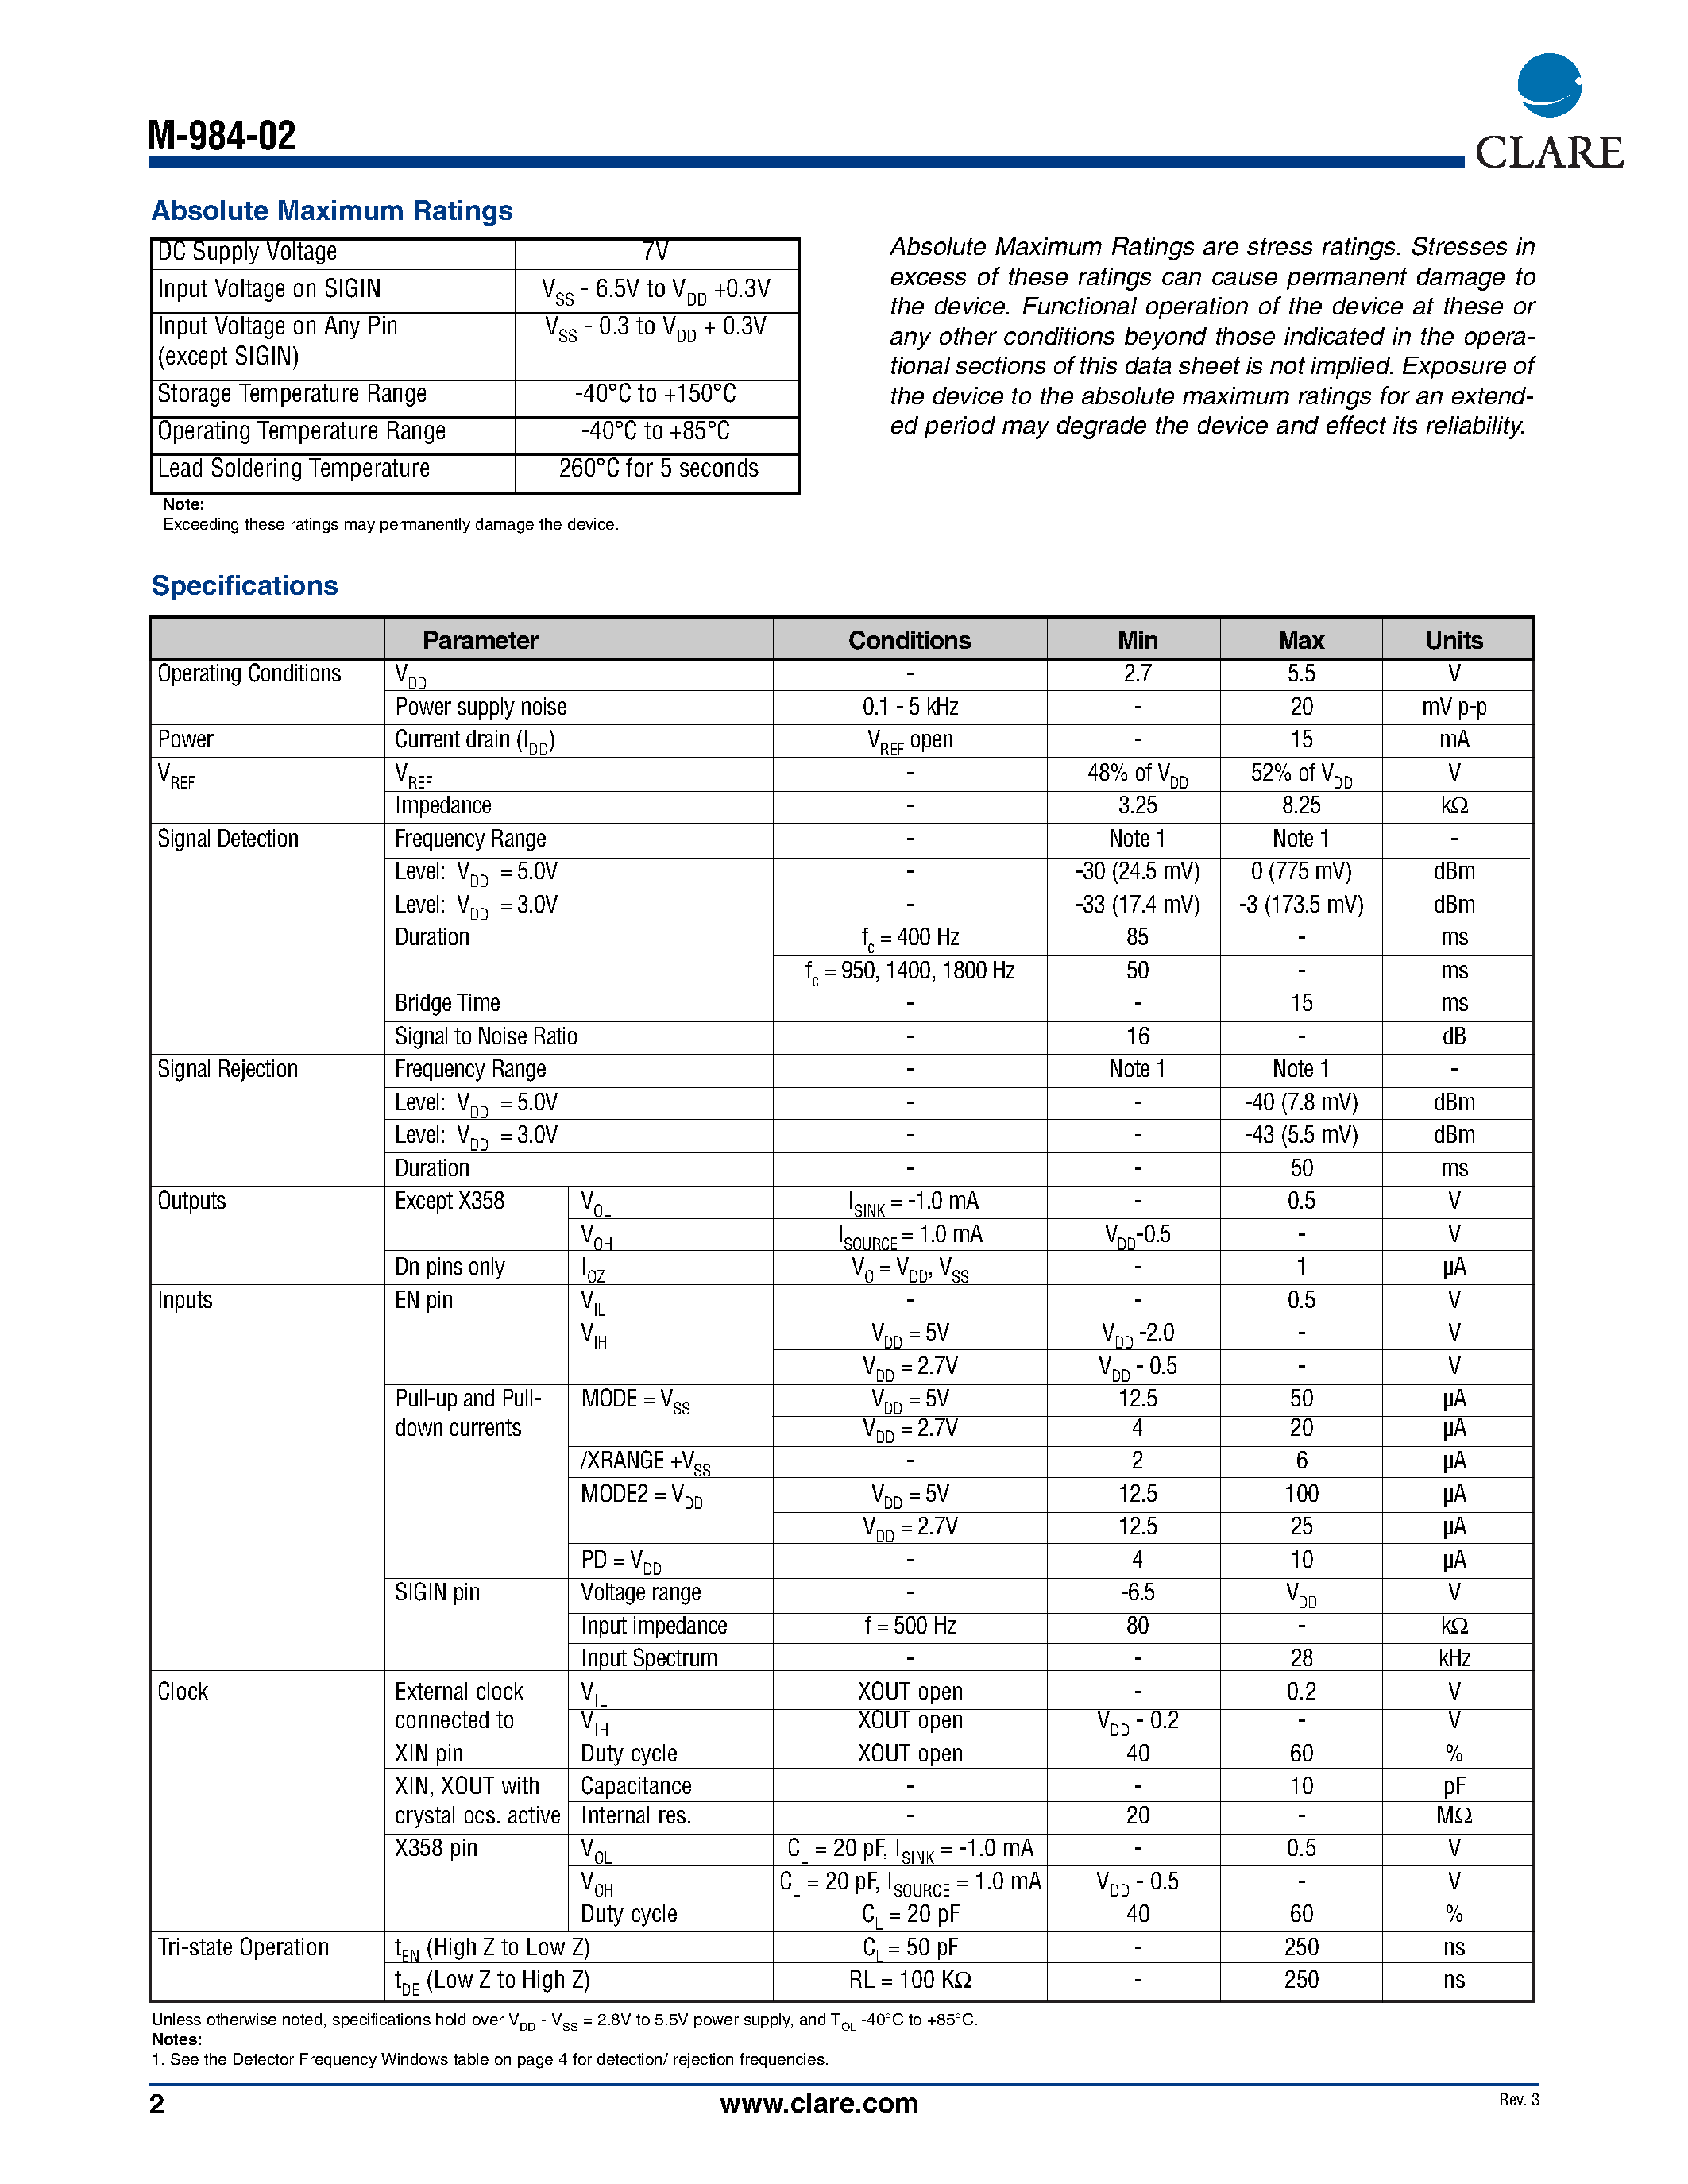 Datasheet M-984-02T - Special Information Tone Detector page 2